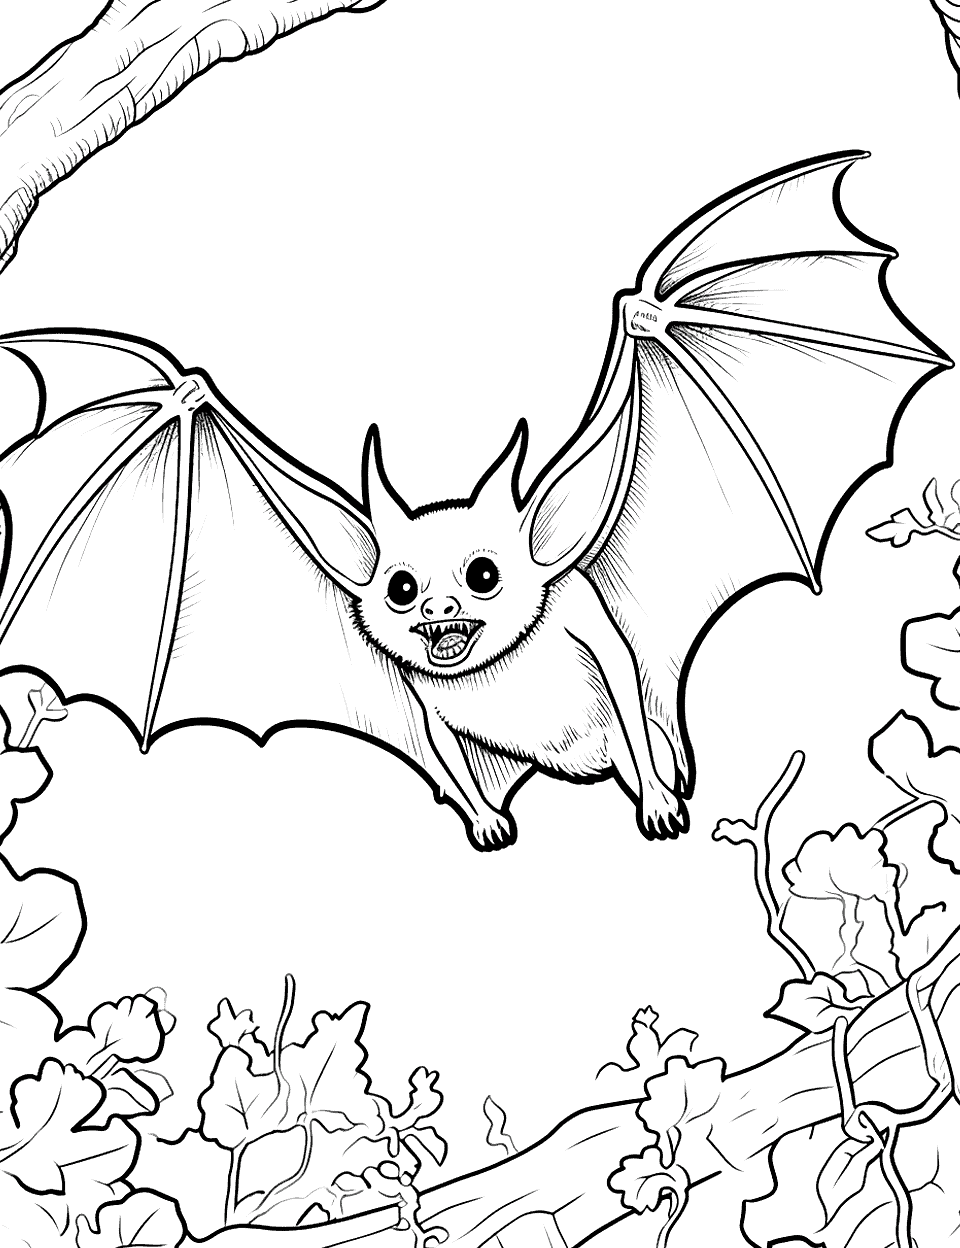 Yinpterochiroptera in its Habitat Bat Coloring Page - A Yinpterochiroptera bat in a simple representation of its natural habitat.